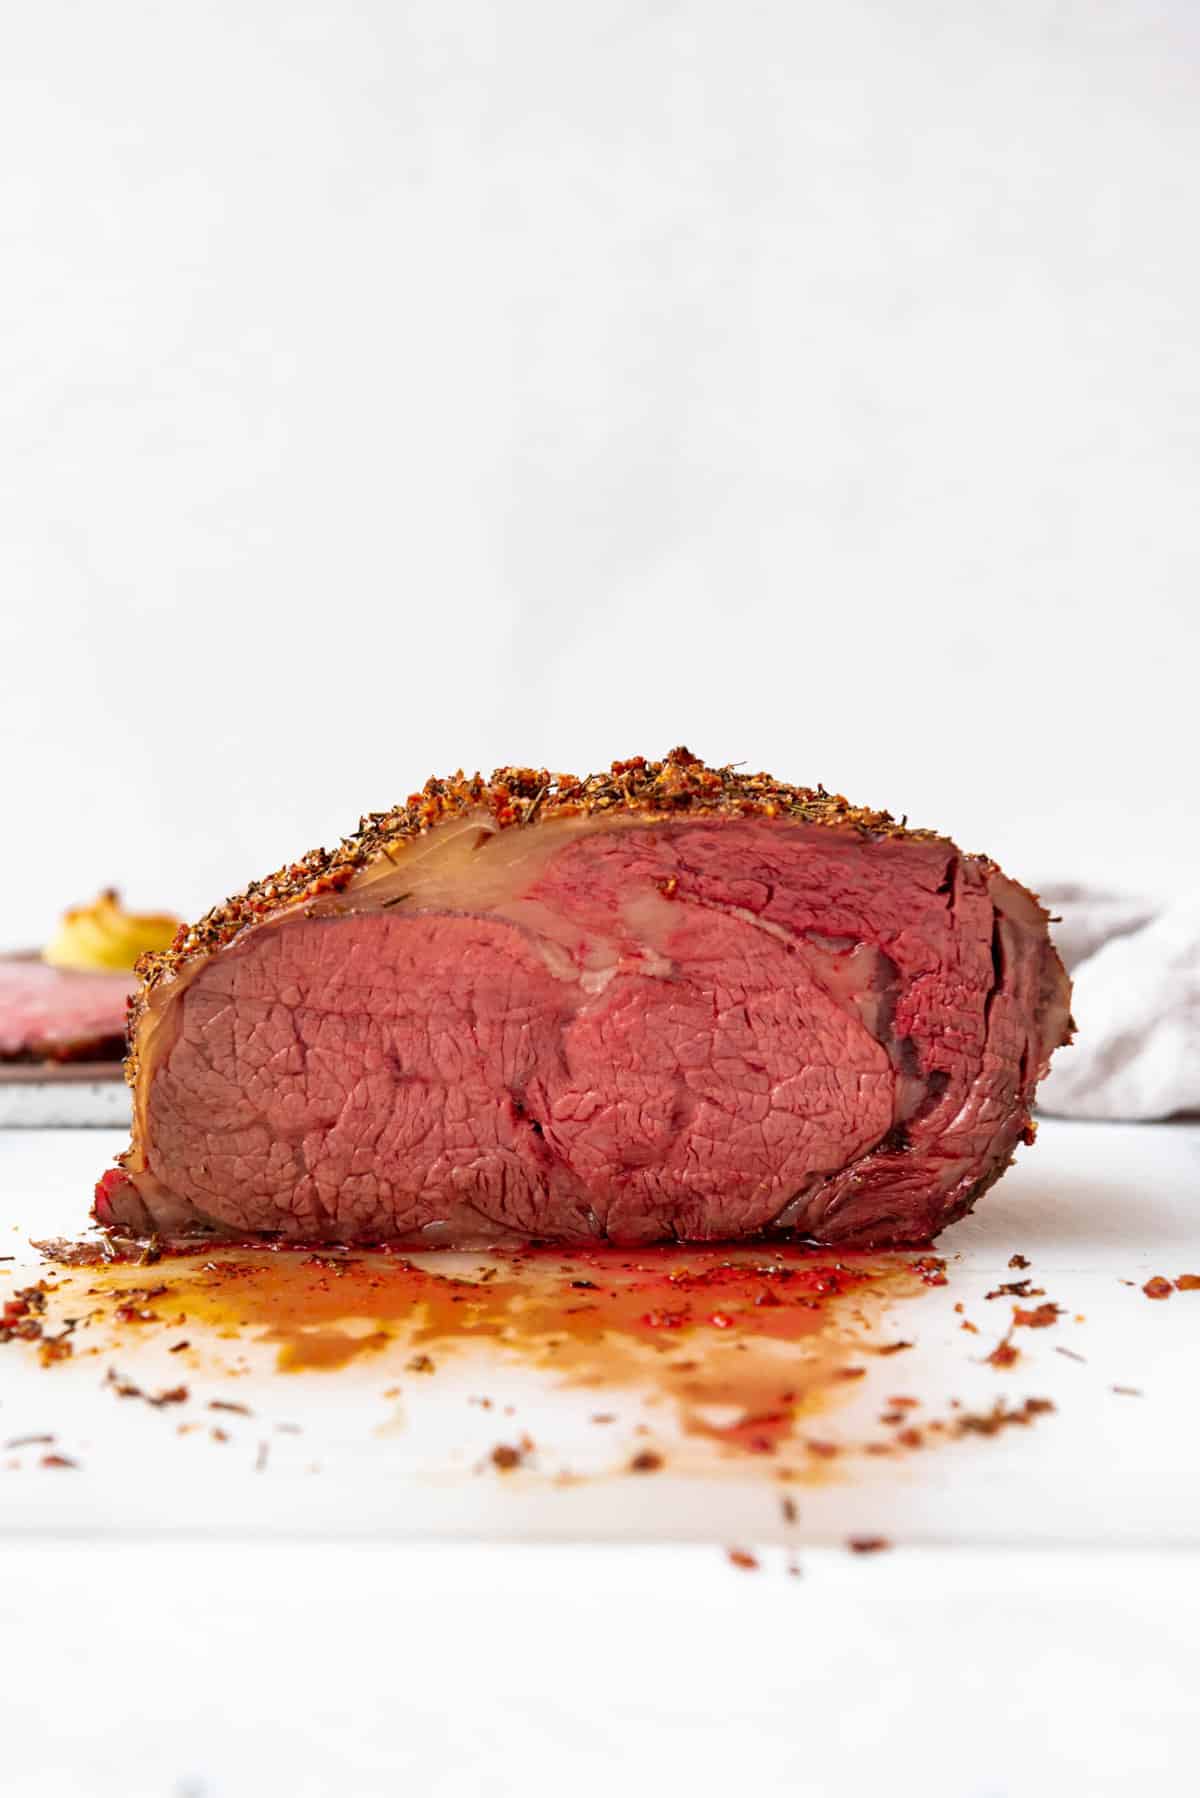 A medium-rare smoked prime rib roast on a cutting board with its juices.